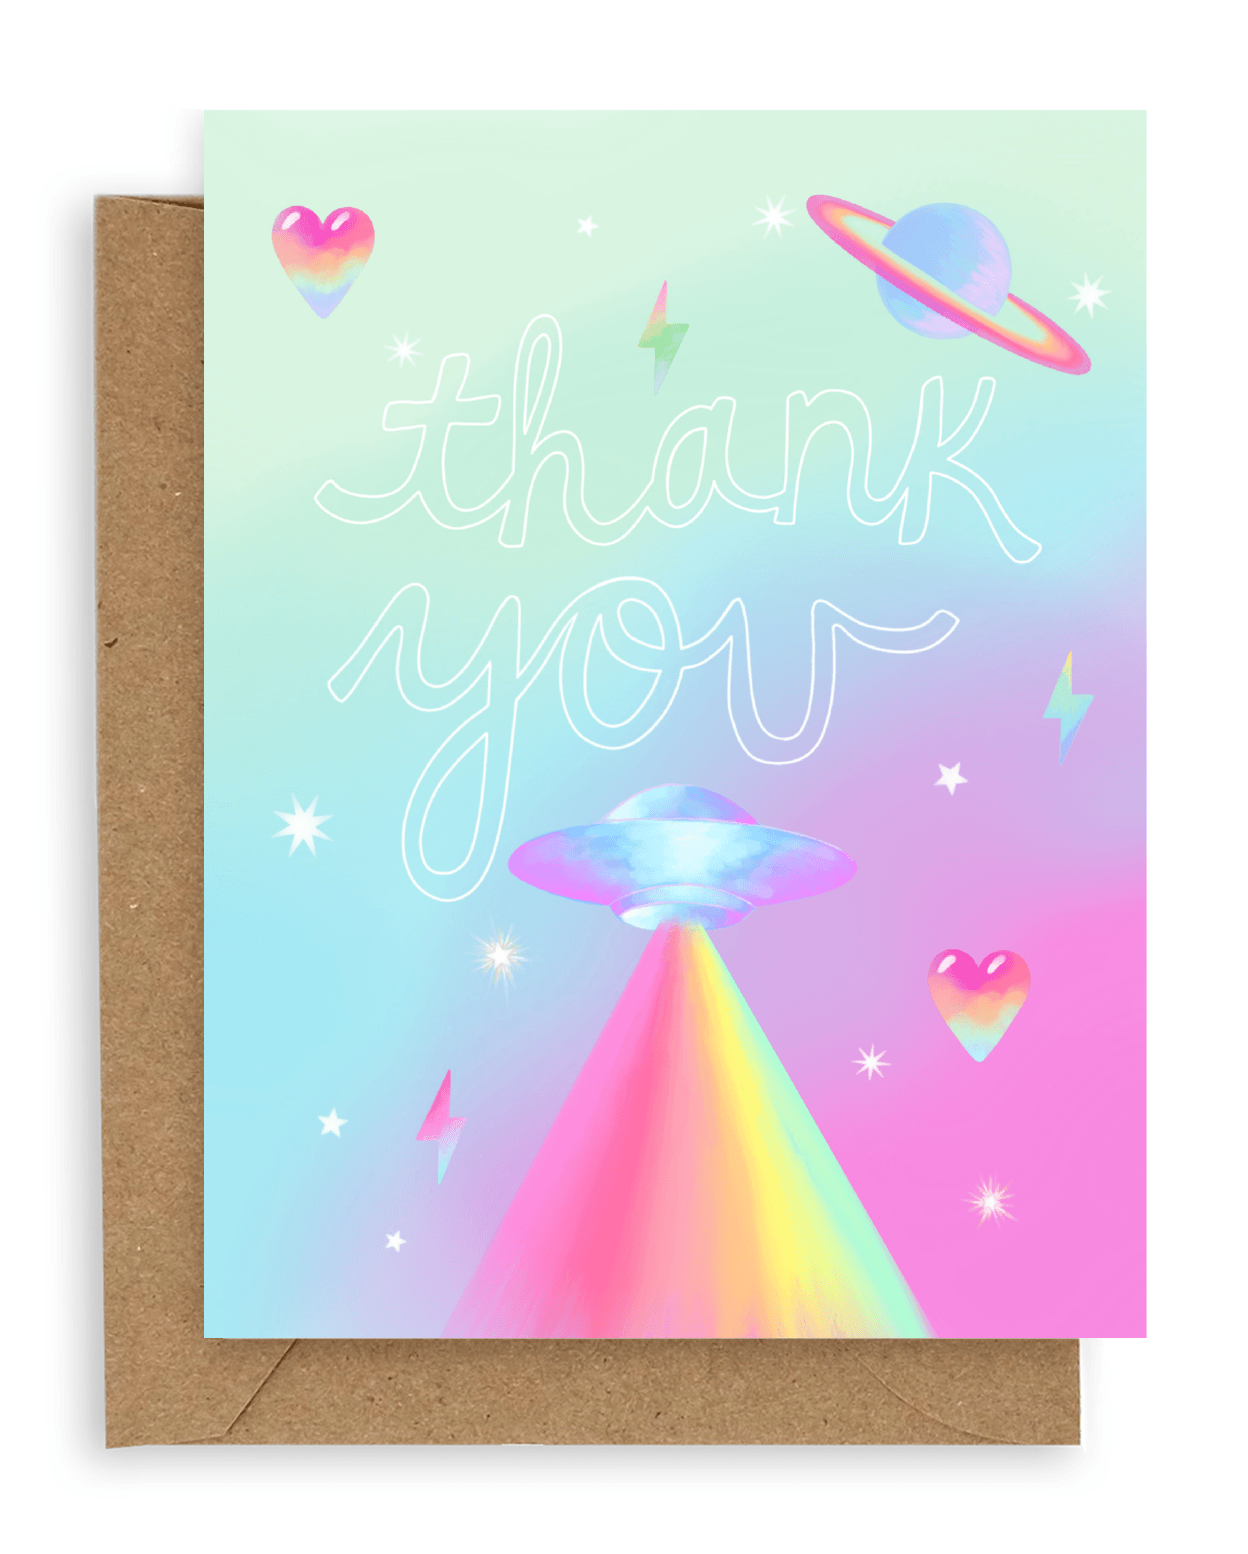 Neon icons such as stars, saturn, a ufo, and hearts surround the words &quot;thank you&quot; in hollowed out white font printed on a gradient pink and blue background. Shown with kraft envelope.